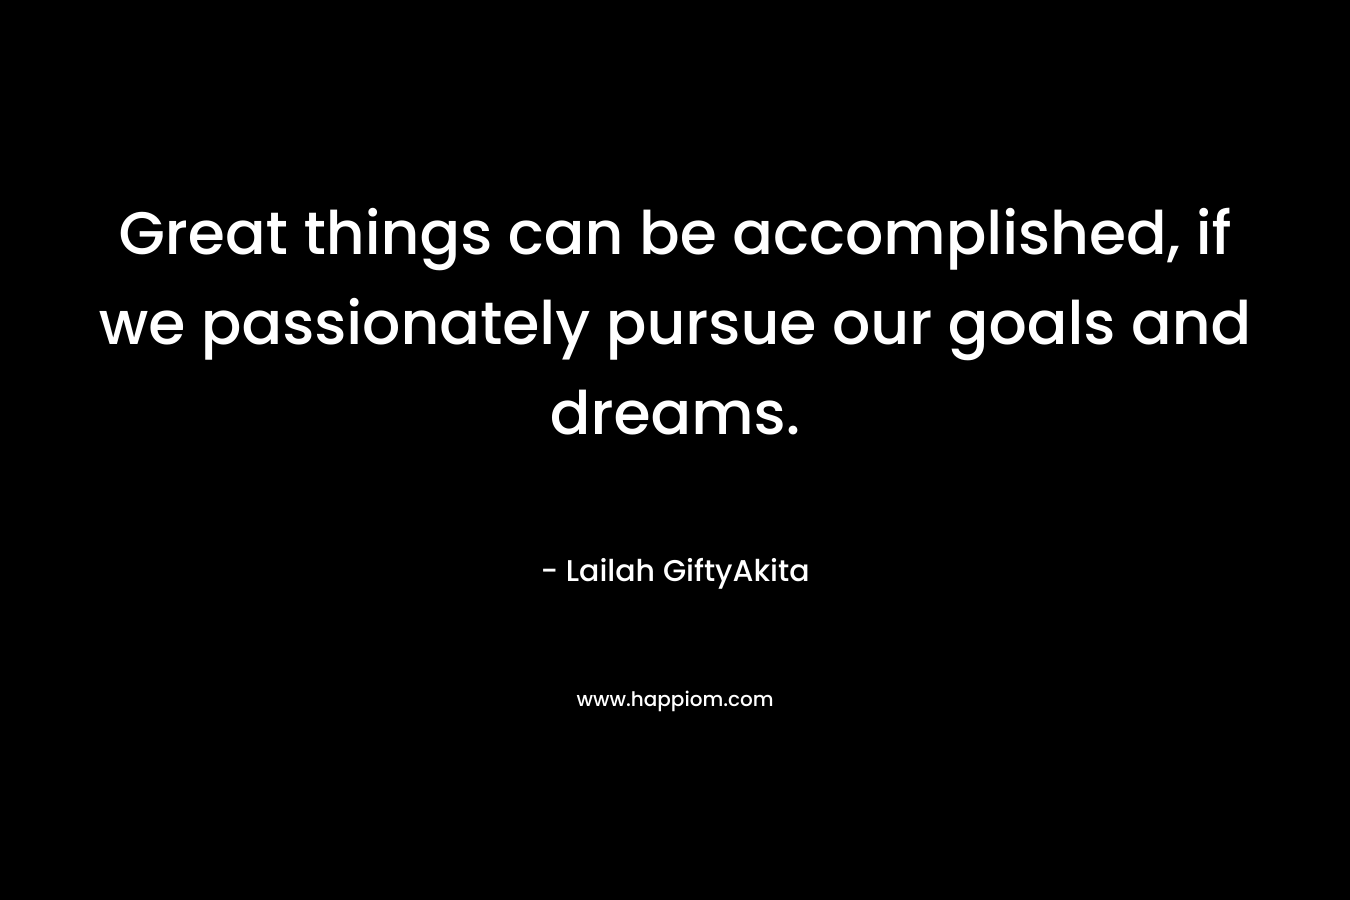 Great things can be accomplished, if we passionately pursue our goals and dreams.